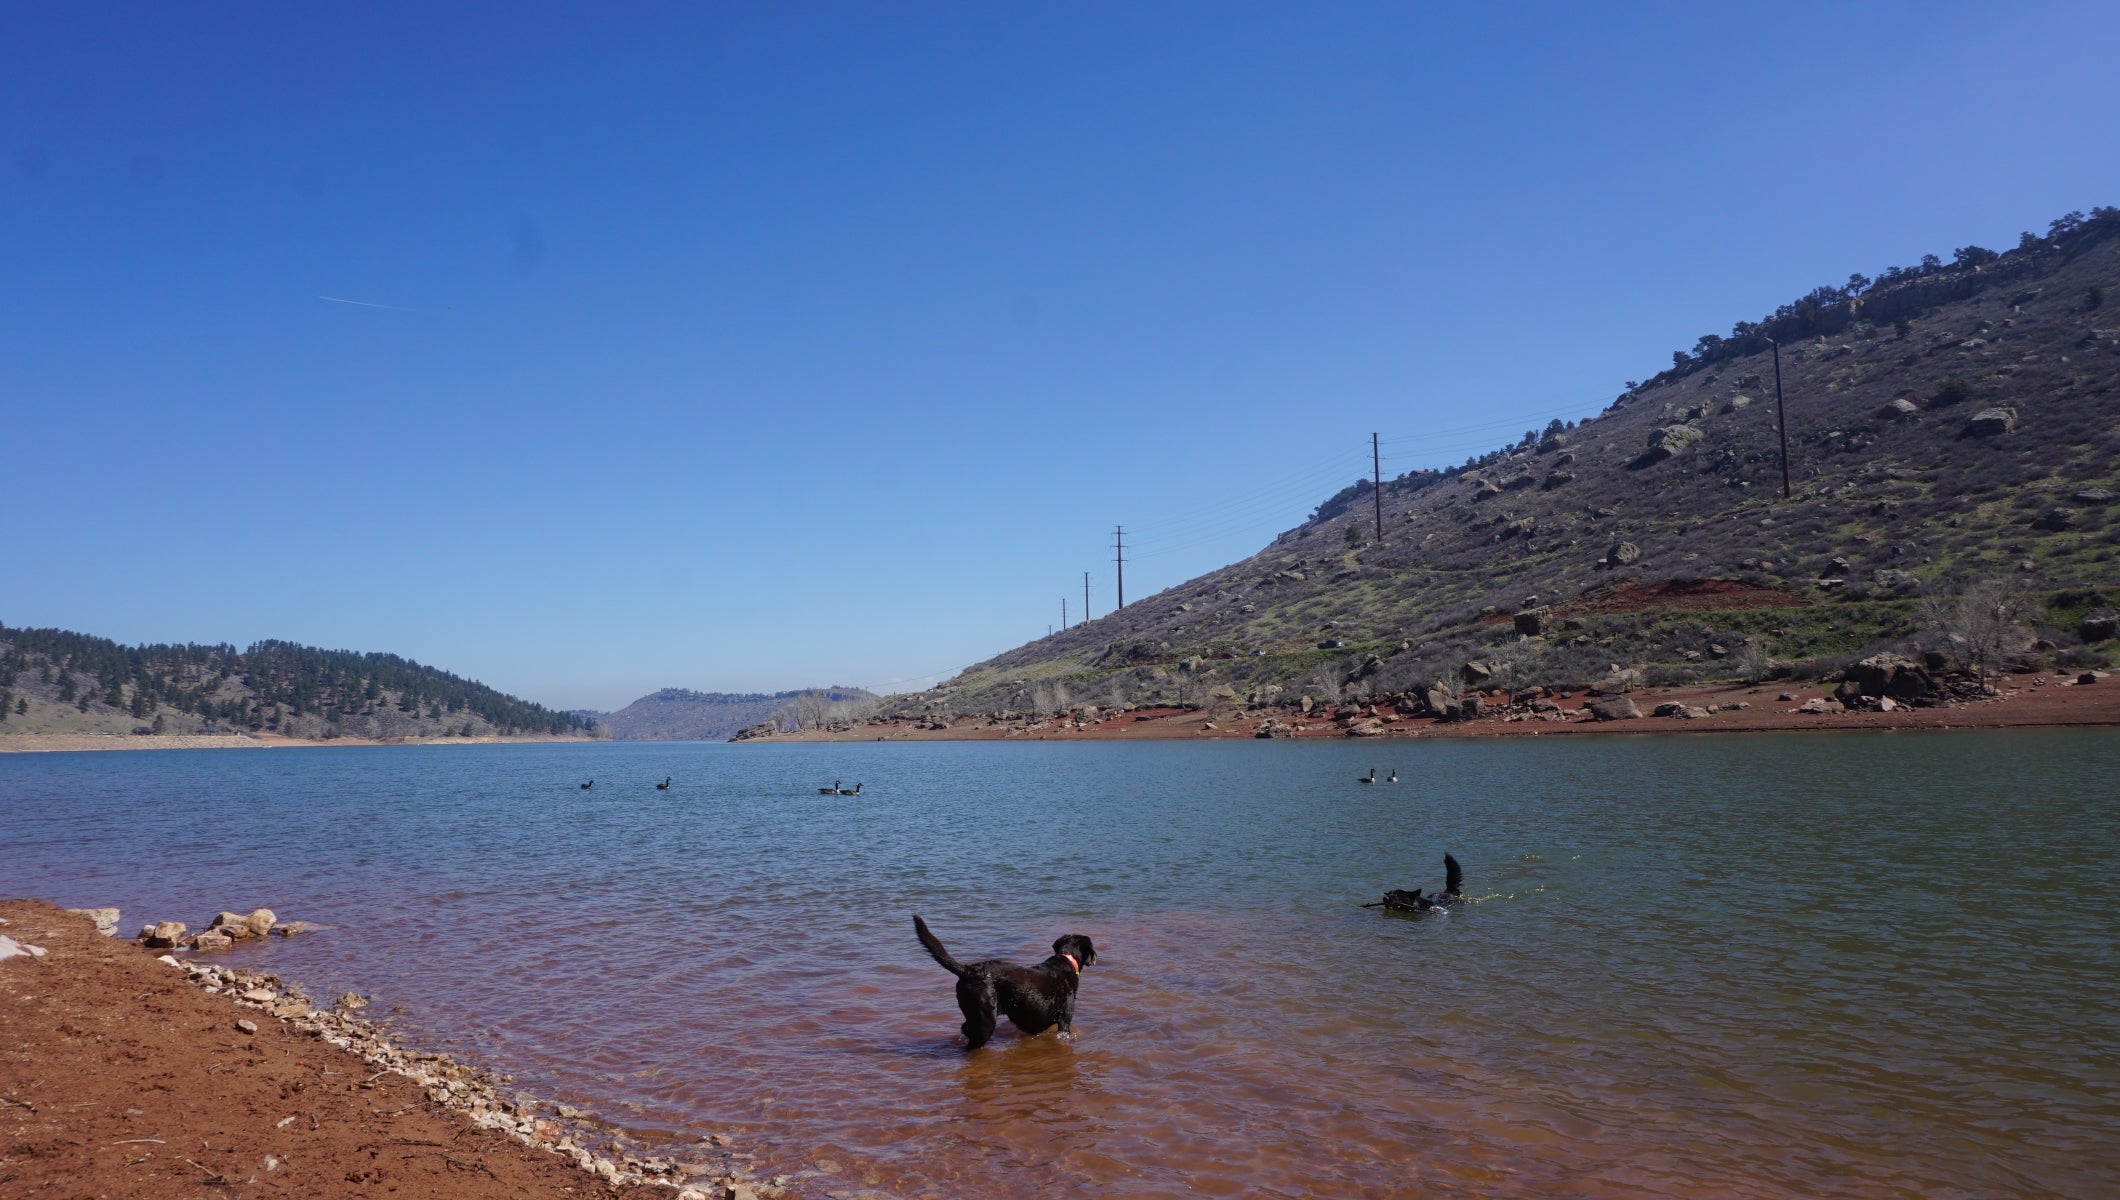 Camper submitted image from Horsetooth Reservoir - 5